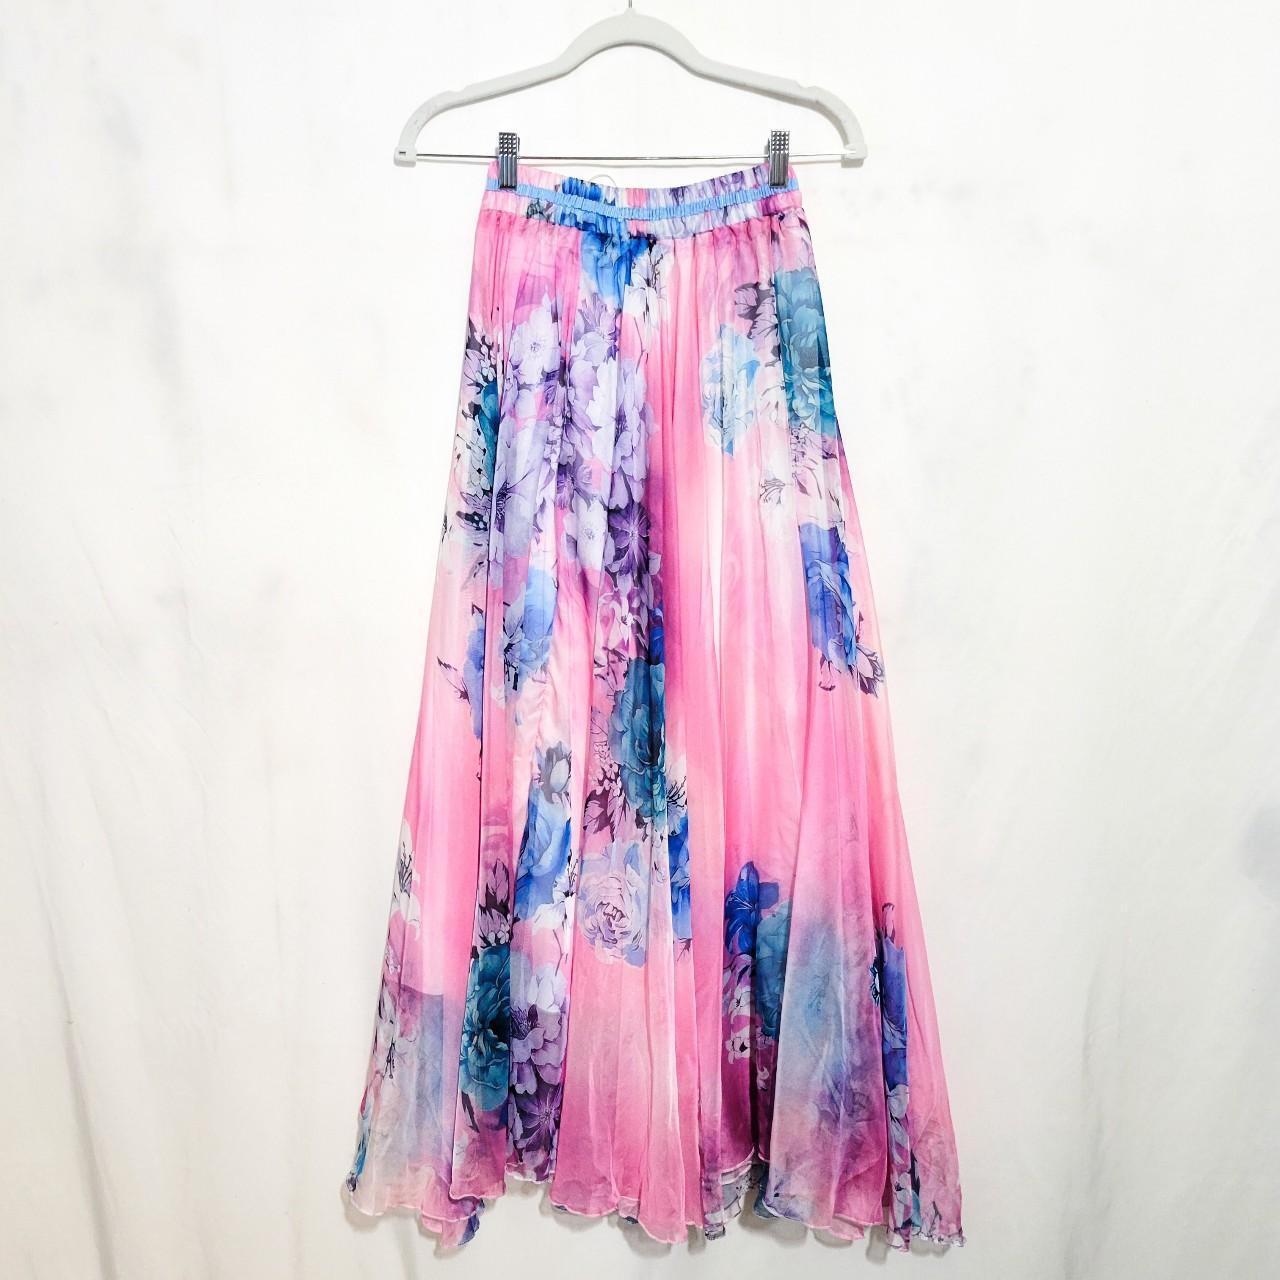 Product Image 1 - Vintage Sheer Floral Fairycore Maxi